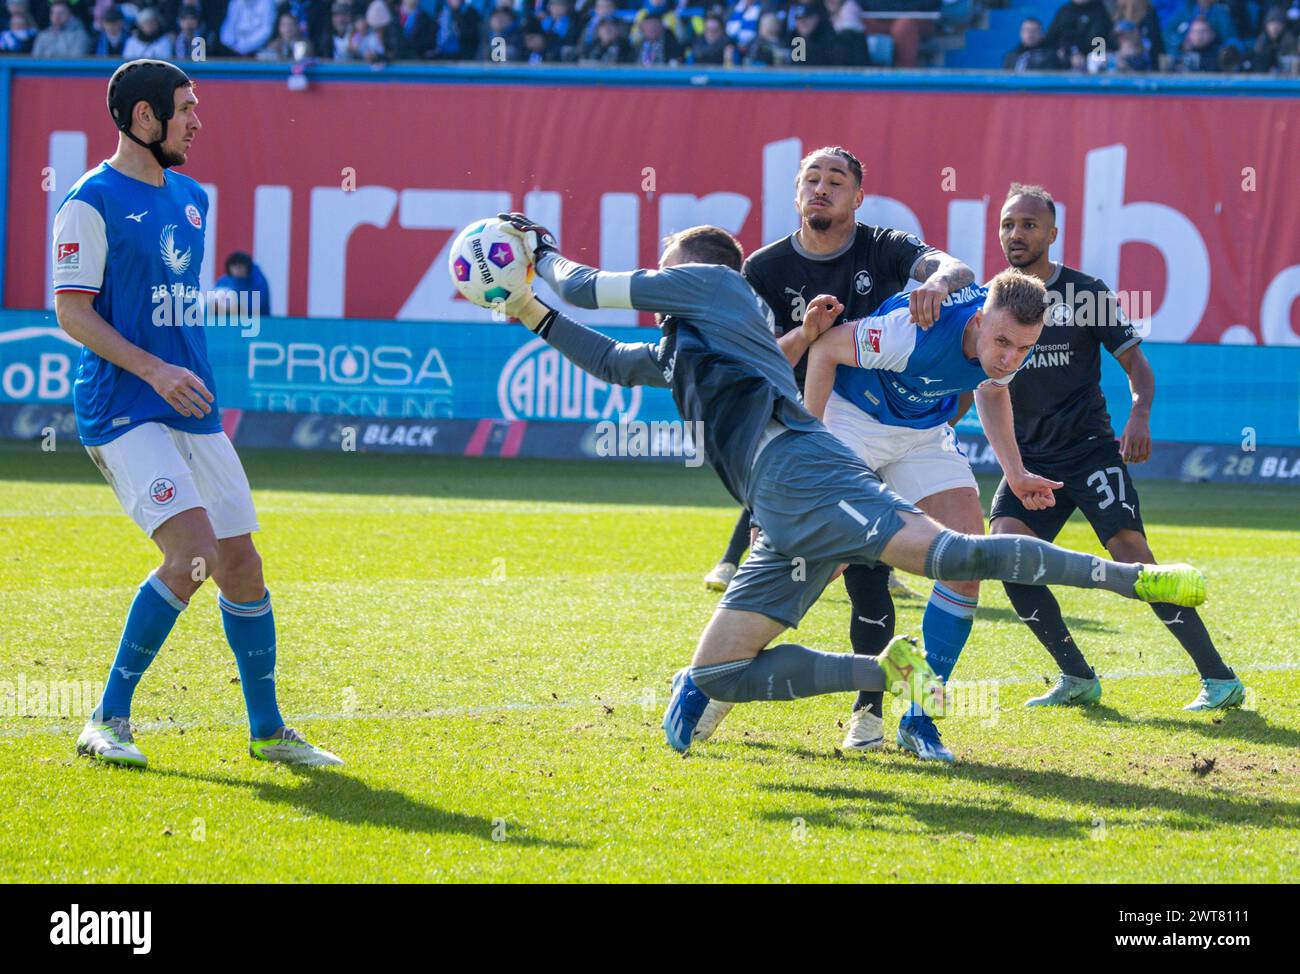 Rostock, Germany. 16th Mar, 2024. Soccer: Bundesliga 2, Hansa Rostock - SpVgg Greuther Fürth, Matchday 26, Ostseestadion. Rostock goalkeeper Markus Kolke holds a ball. Credit: Jens Büttner/dpa - IMPORTANT NOTE: In accordance with the regulations of the DFL German Football League and the DFB German Football Association, it is prohibited to utilize or have utilized photographs taken in the stadium and/or of the match in the form of sequential images and/or video-like photo series./dpa/Alamy Live News Stock Photo